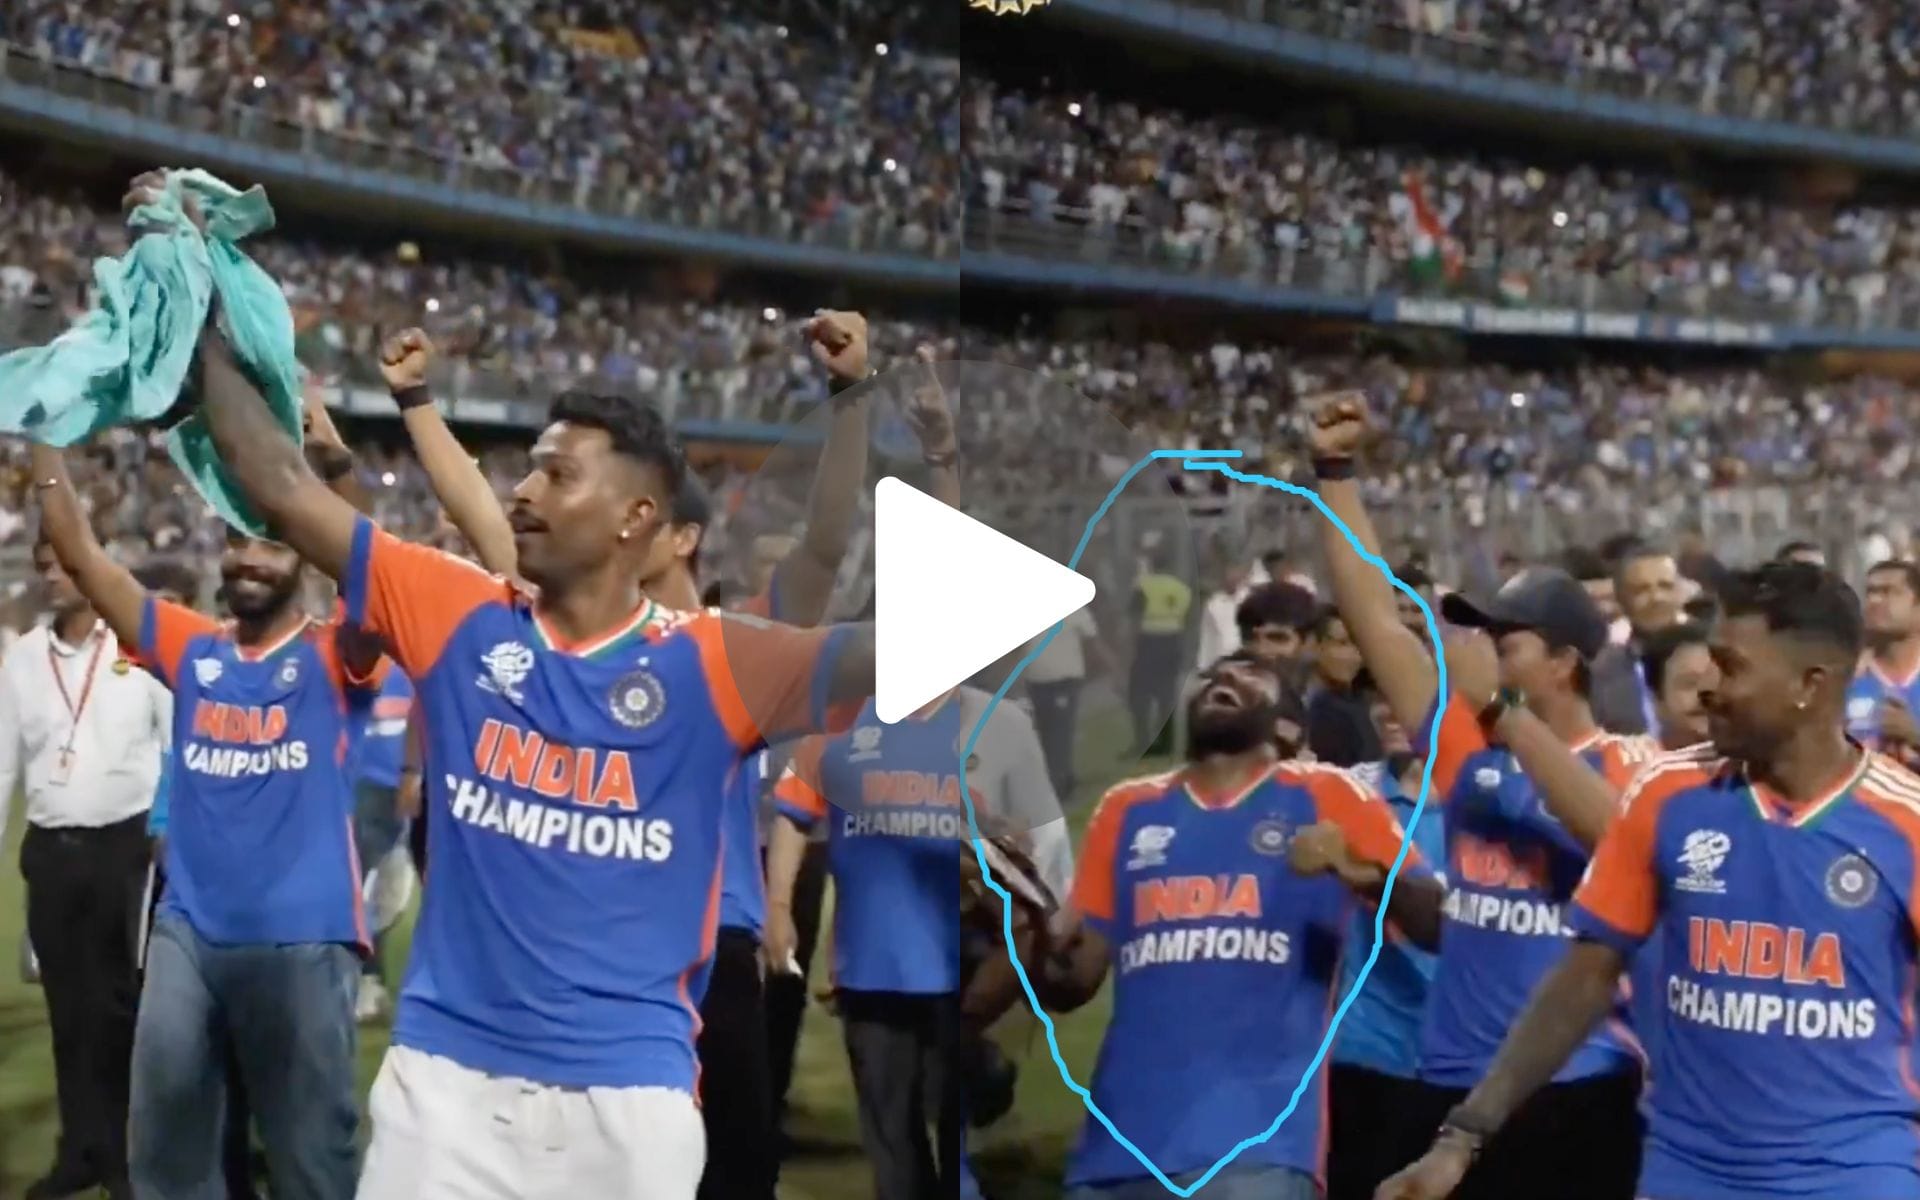 [Watch] Bumrah Bursts Into Laughter' As Pandya Hilariously Catches A Fan's Shirt In Wankhede